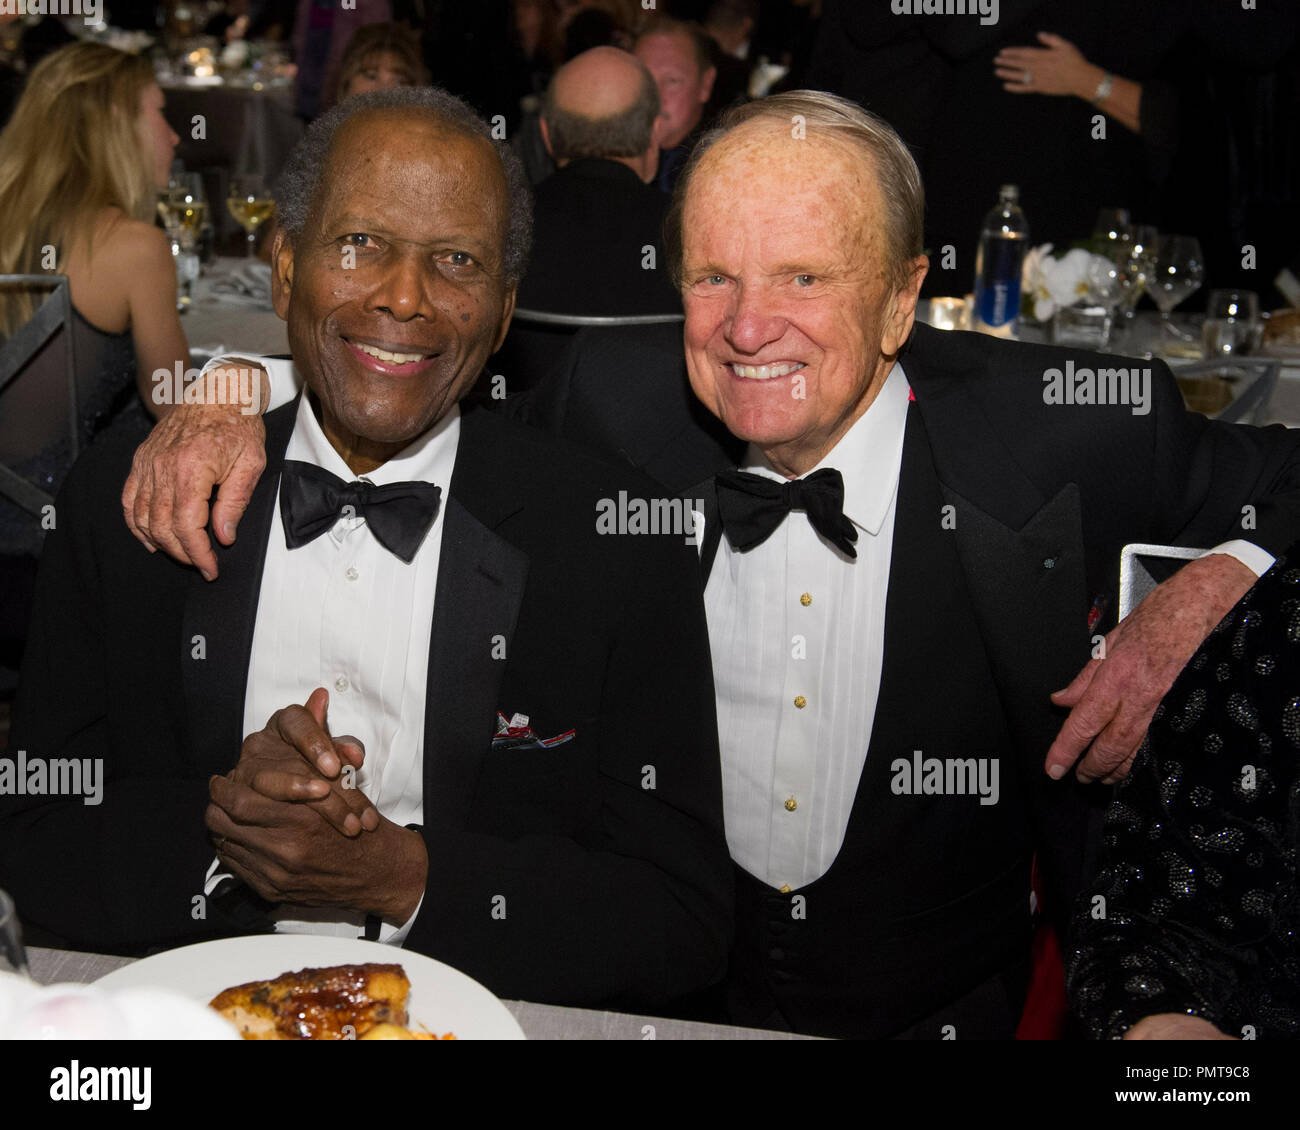 Oscar®-winning actor Sidney Poitier (left) and Honorary Award recipient George Stevens Jr. attend the 2012 Governors Awards at The Ray Dolby Ballroom at Hollywood & Highland Center® in Hollywood, CA, Saturday, December 1.  File Reference # 31744 046  For Editorial Use Only -  All Rights Reserved Stock Photo